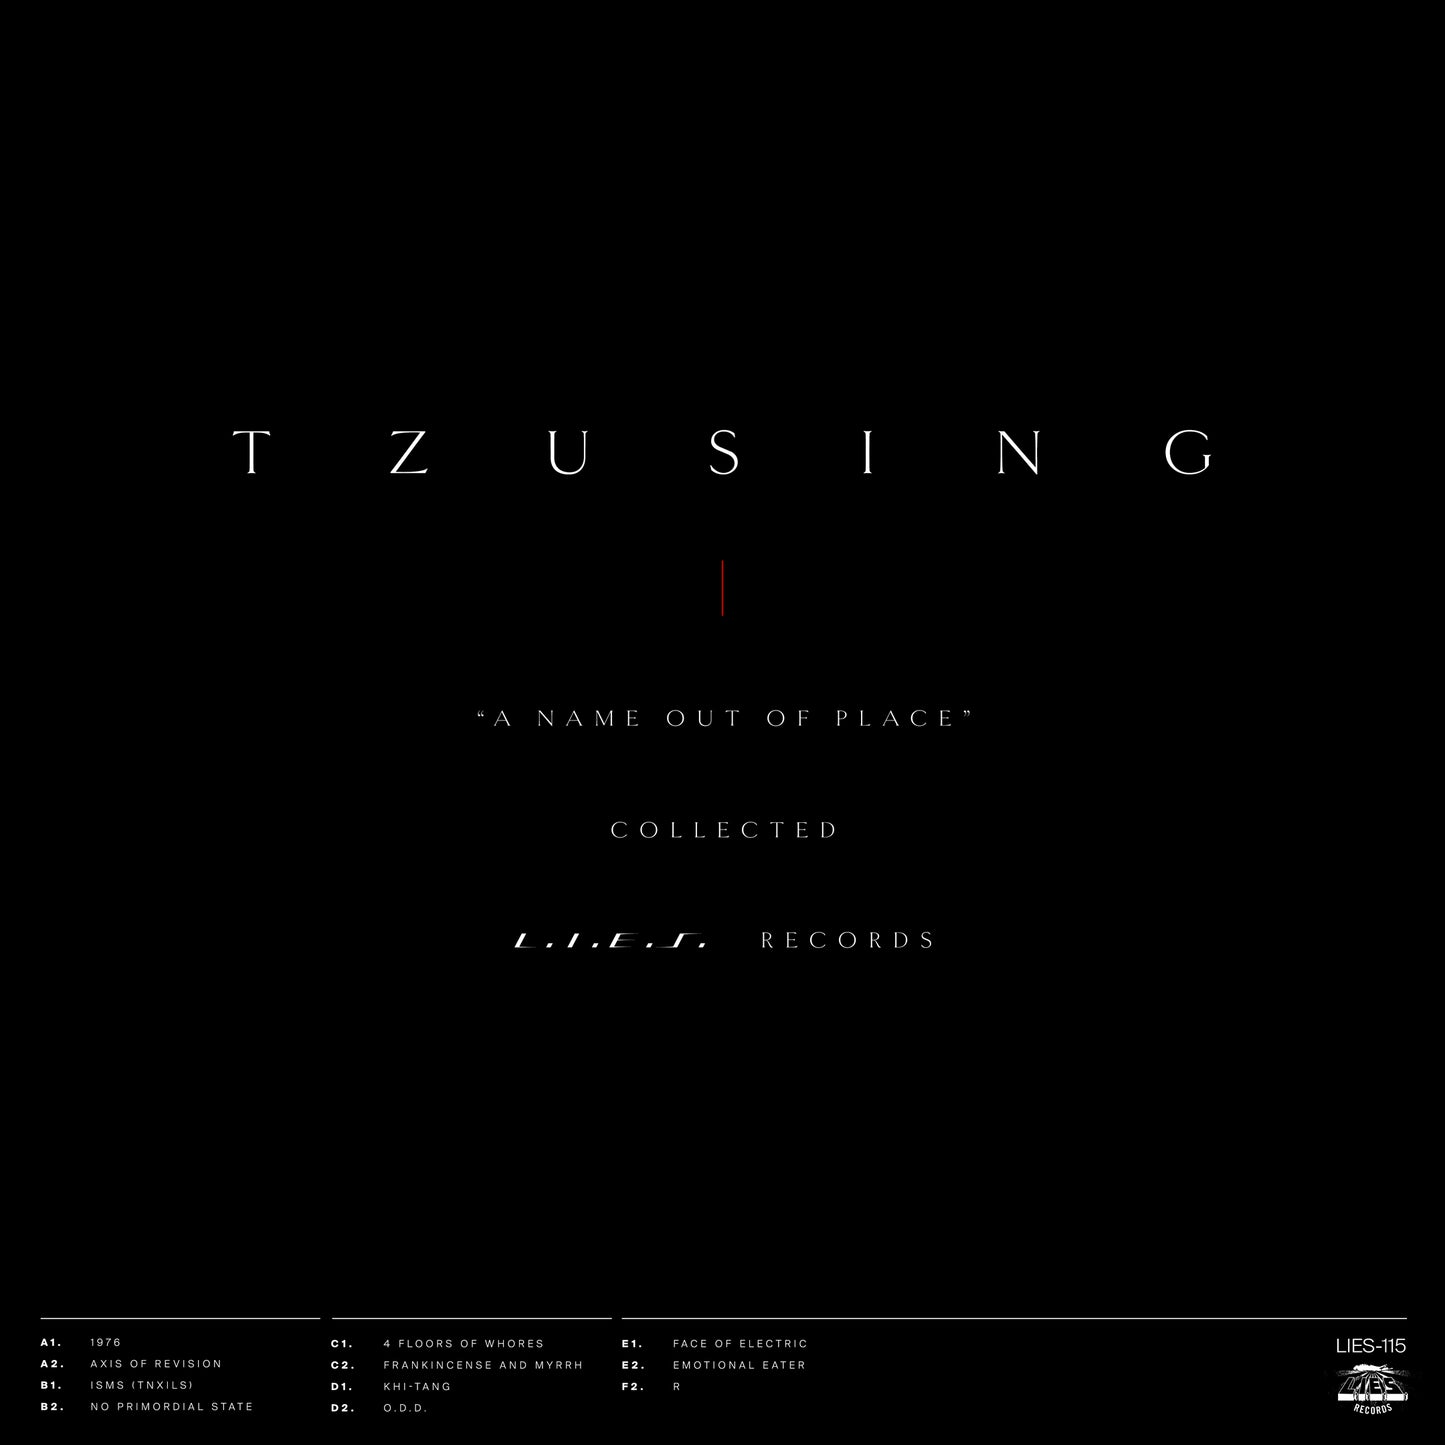 Tzusing - A Name Out of Place Collected RED VINYL Version 3xLP - LIES-115